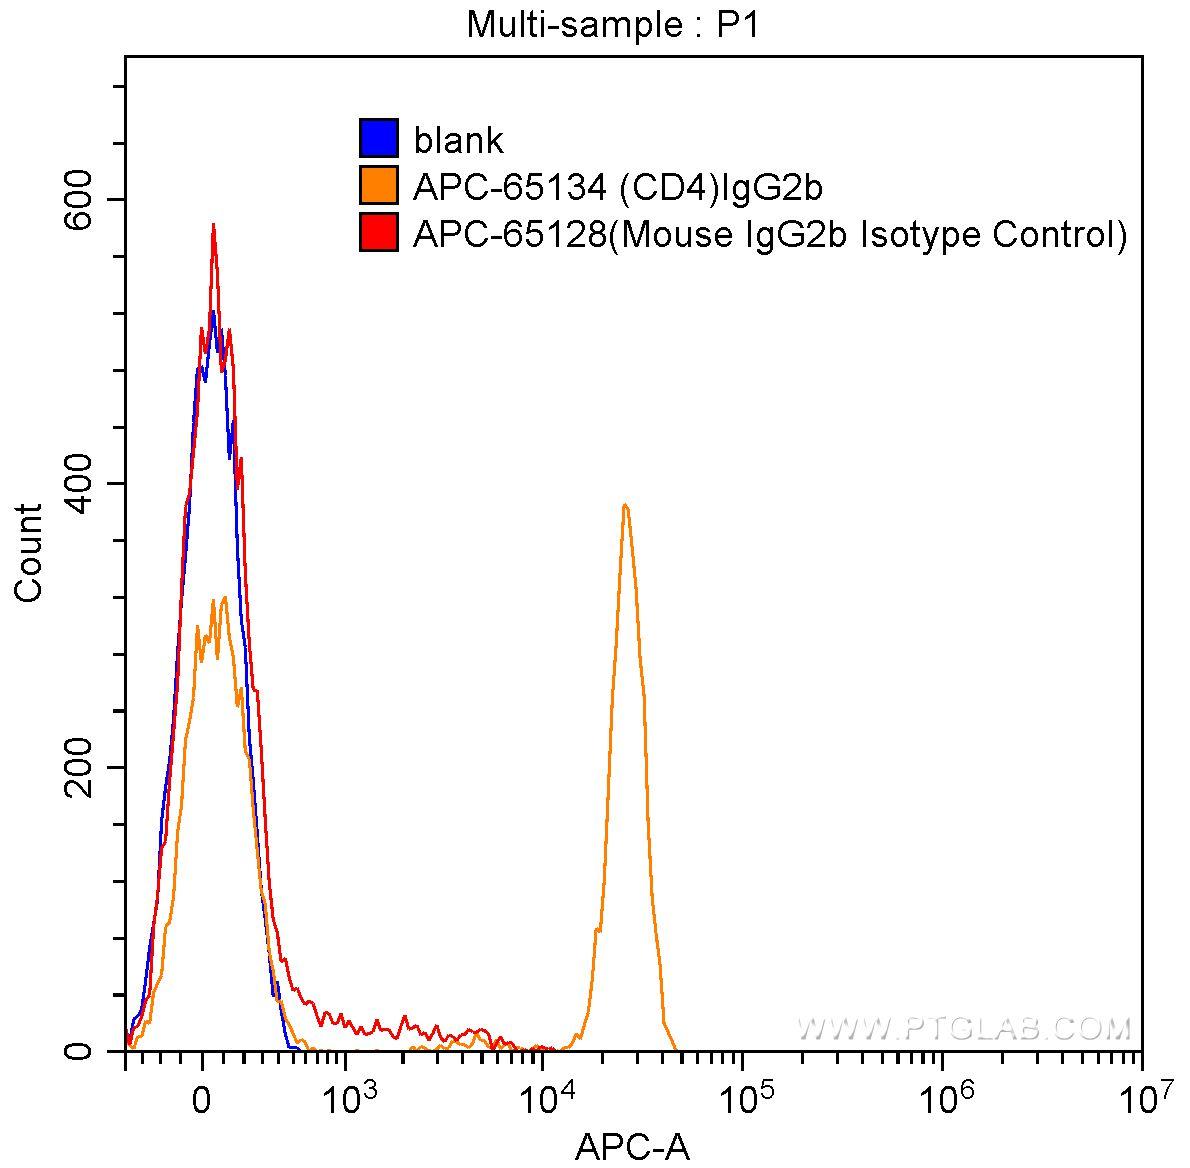 1X10^6 human peripheral blood lymphocytes were surface stained with 0.06 ug APC Mouse IgG2b Isotype Control (APC-65128, clone: MPC-11) (red) or 0.06 ug APC Anti-Human CD4 (APC-65134, clone: OKT4) (orange), or not stained (blank) (blue). Samples were not fixed.